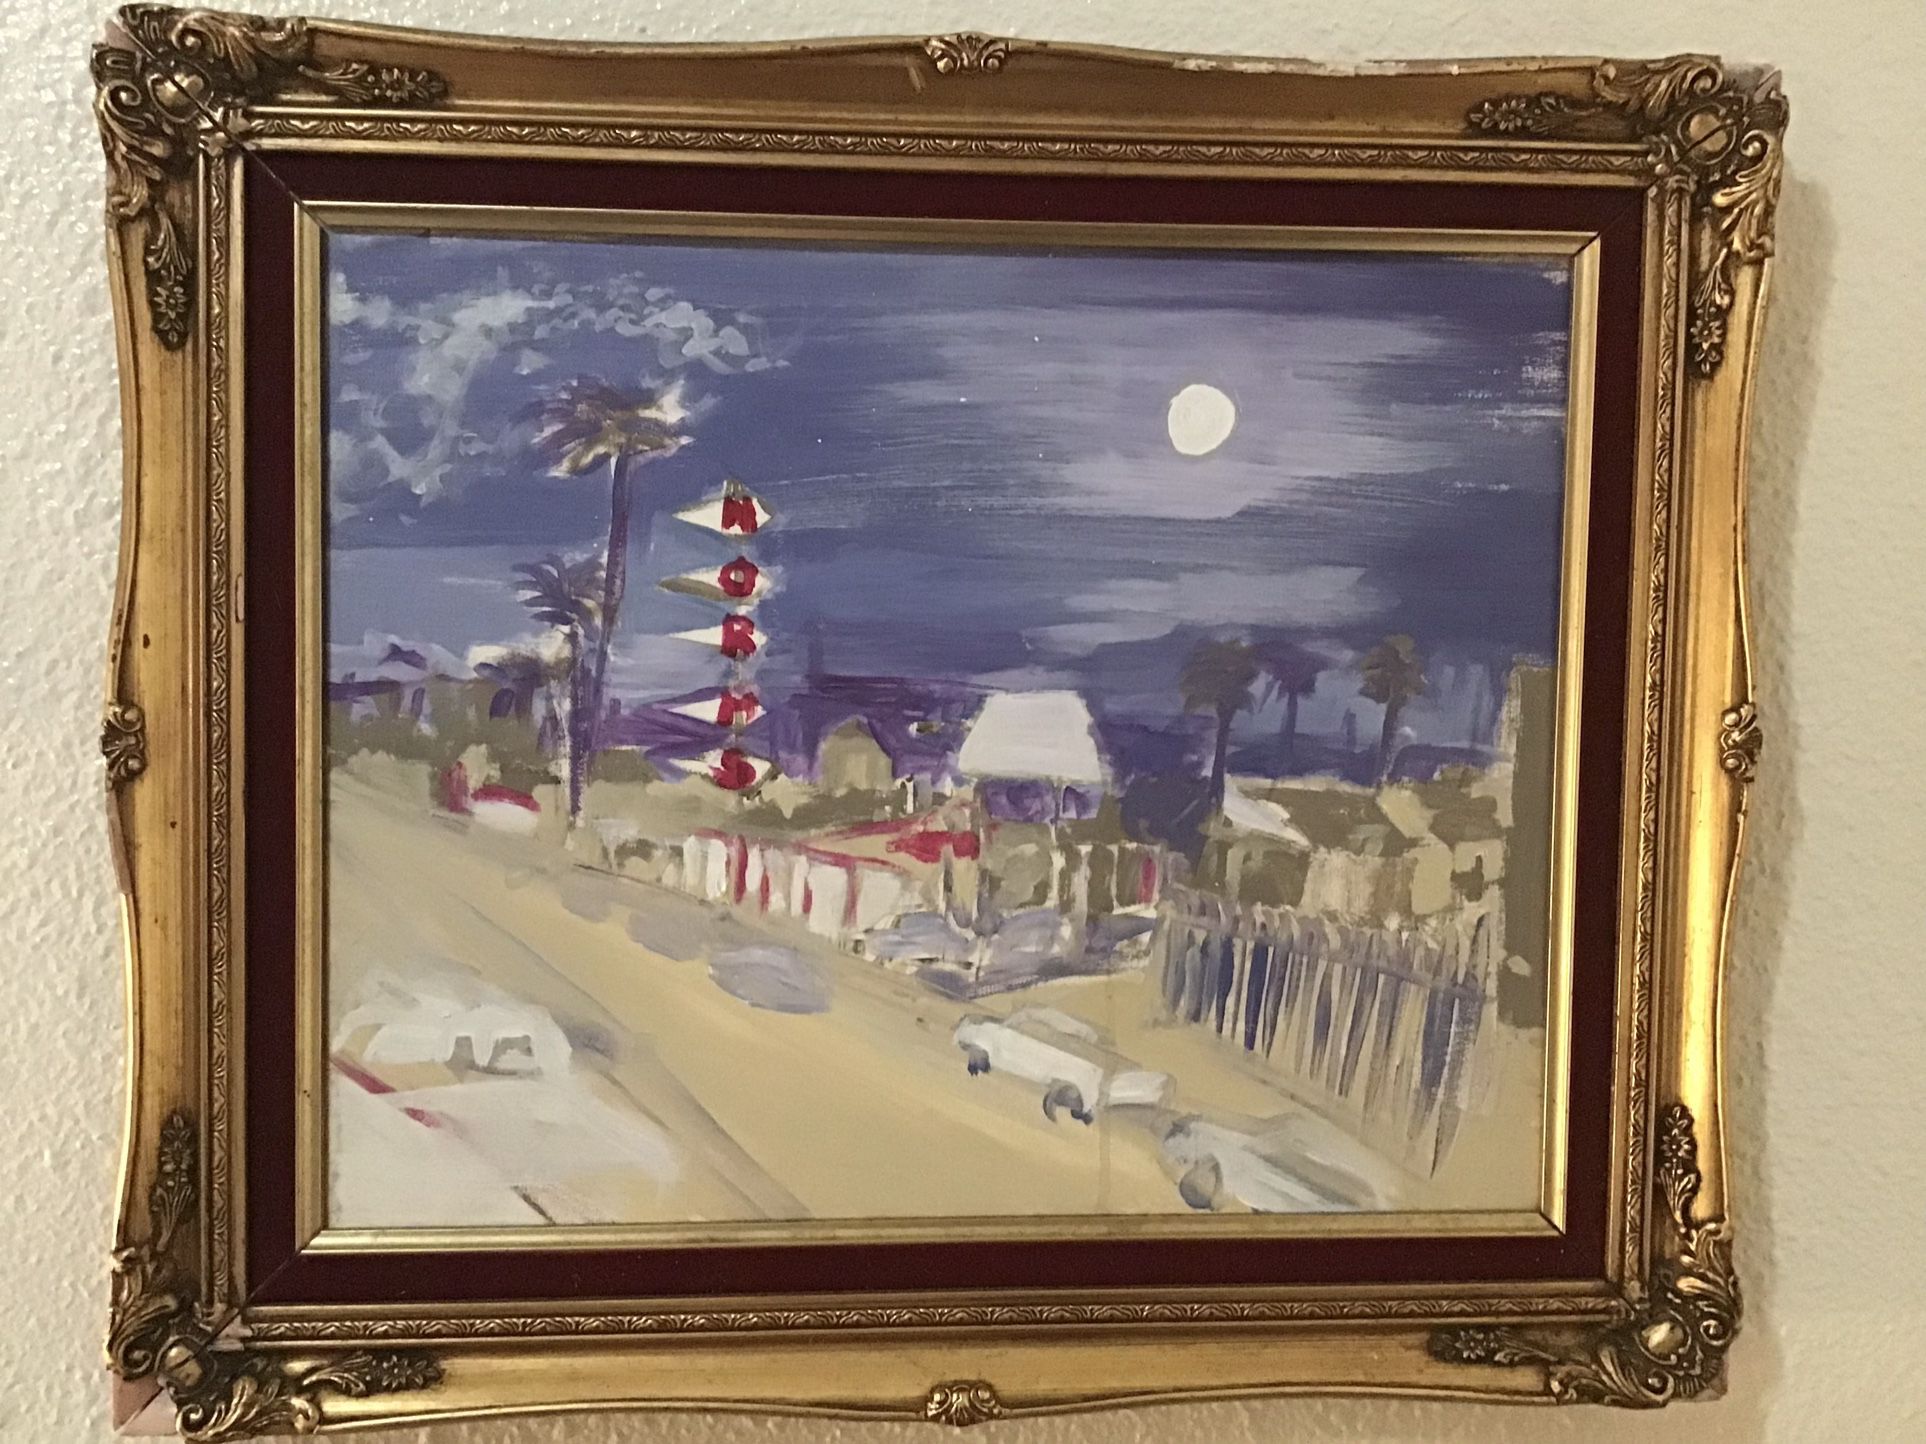 Norms Diner Painting 